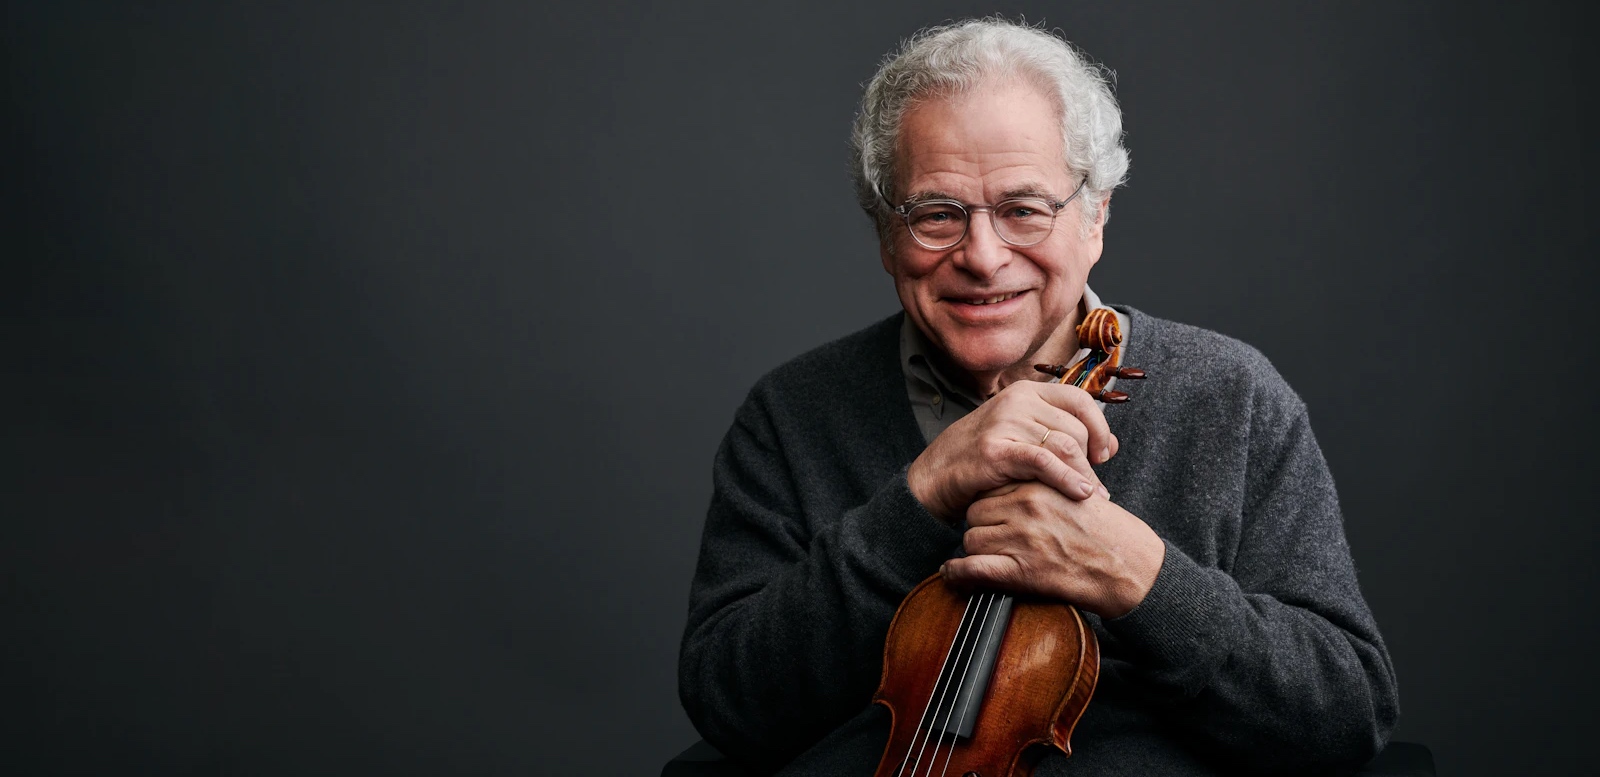 ITZHAK PERLMAN IN THE FIDDLER’S HOUSE at Davies Symphony Hall in San